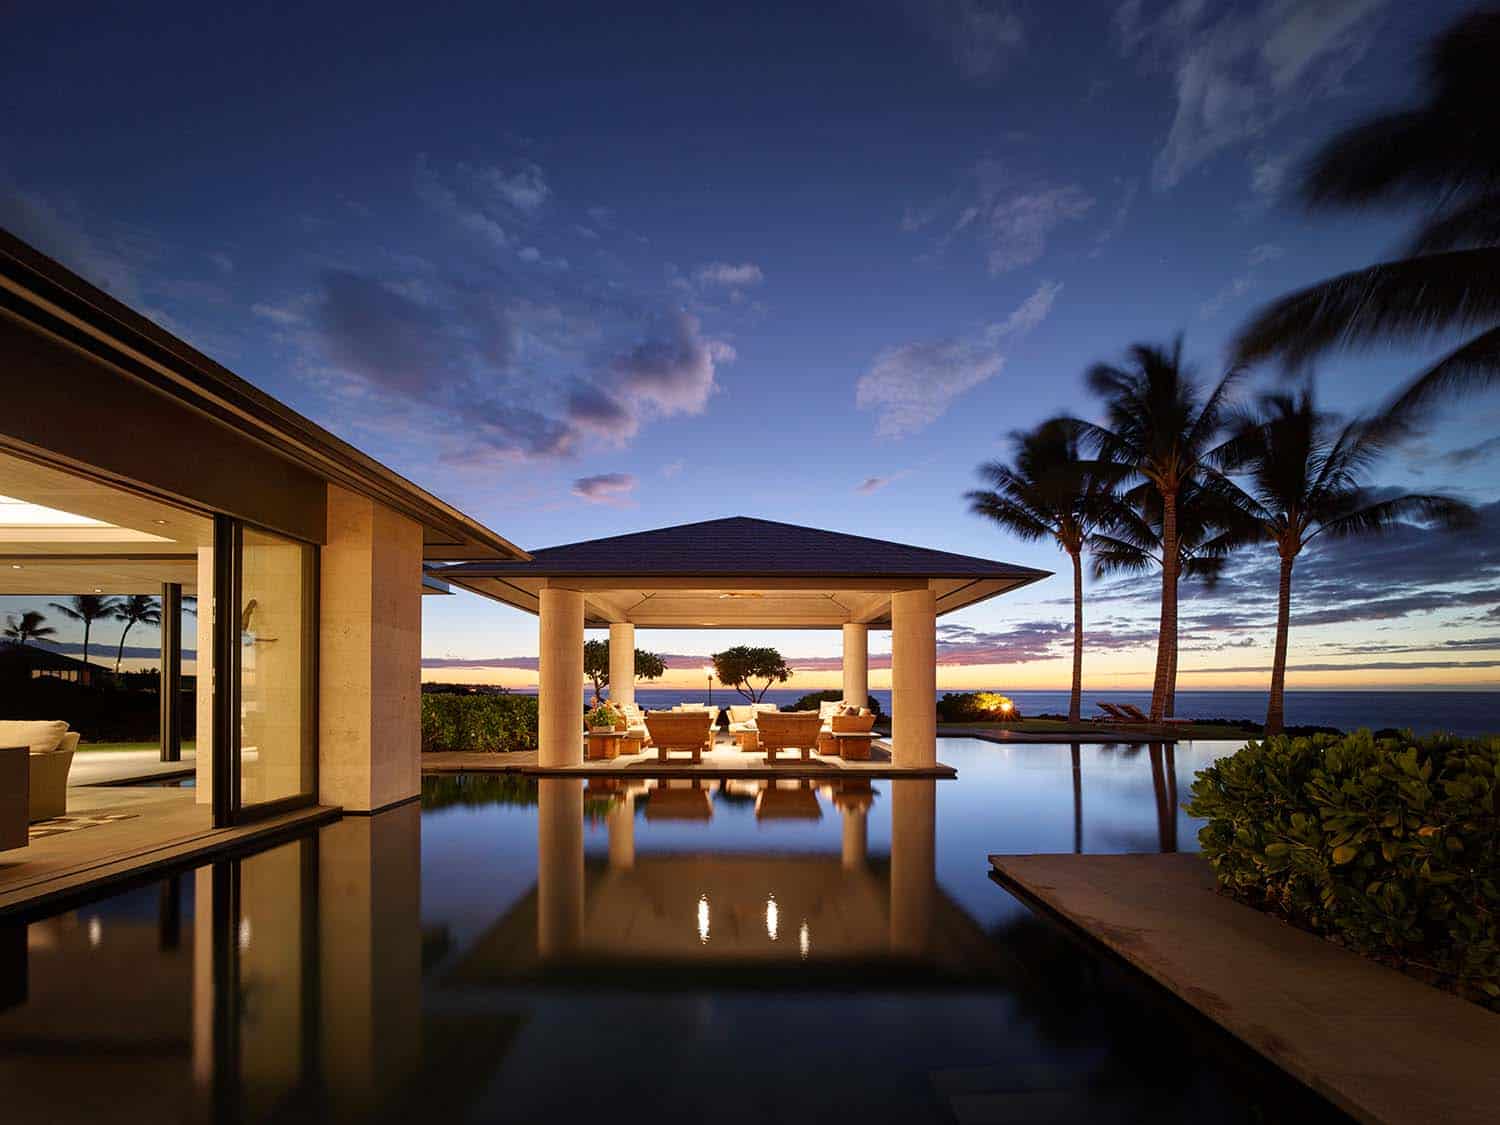 modern coastal style outdoor dining pavilion and swimming pool at dusk